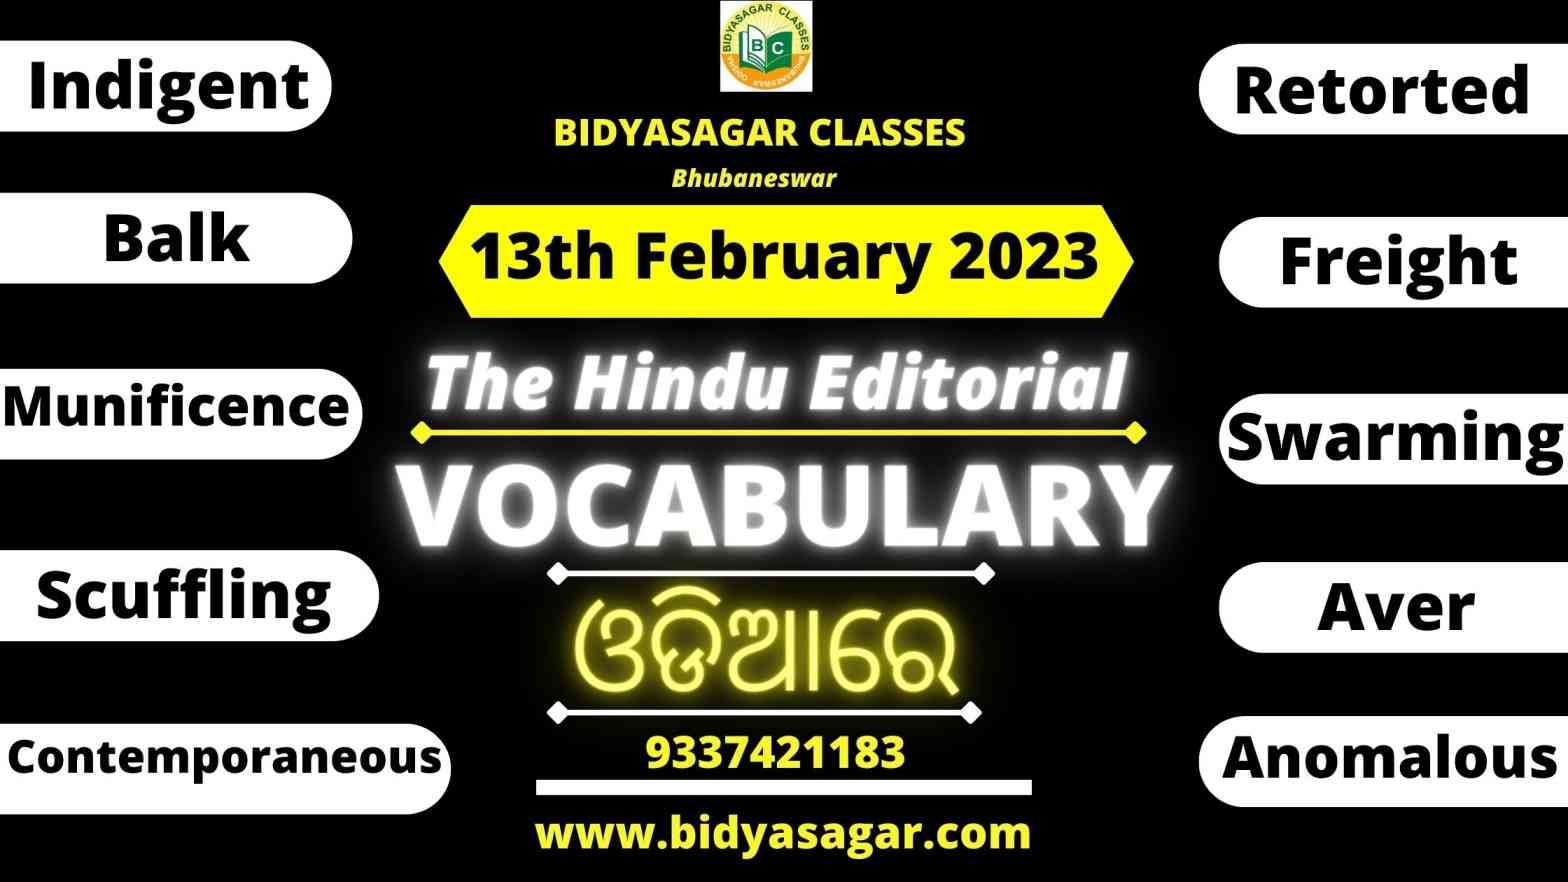 The Hindu Editorial Vocabulary of 13th February 2023